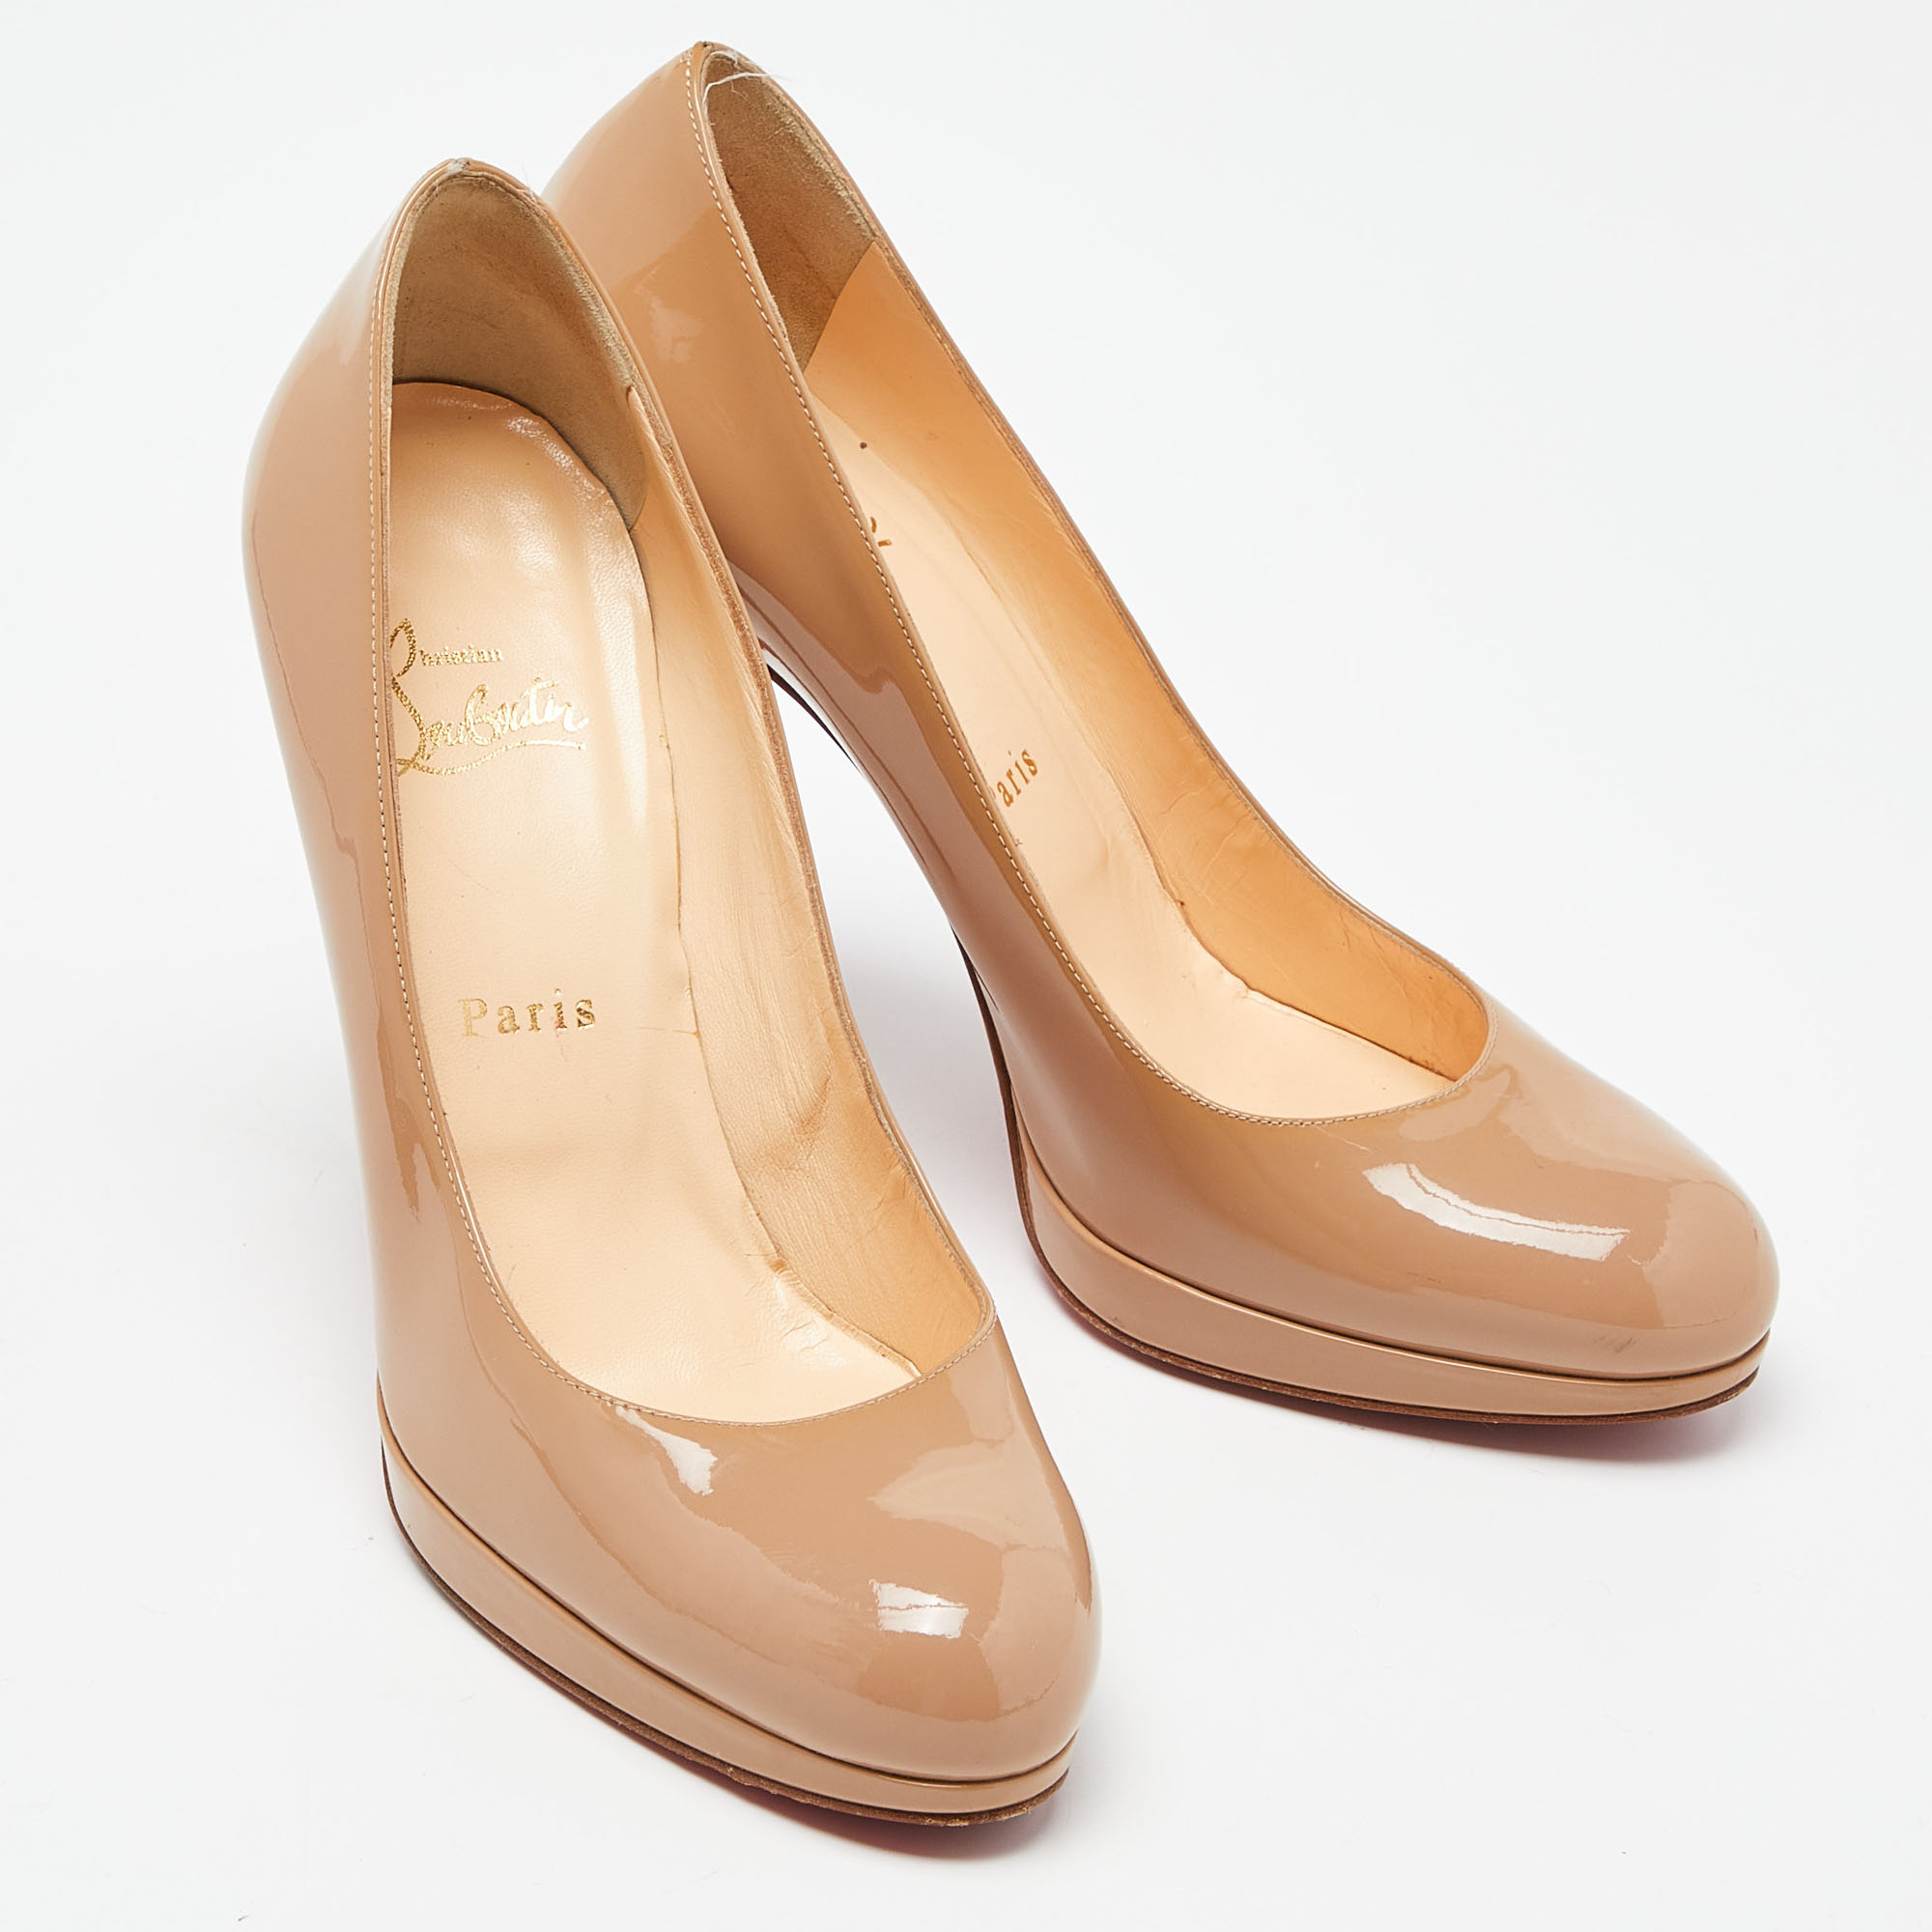 Christian Louboutin Beige Patent Leather New Simple Round Toe Pumps Size 39